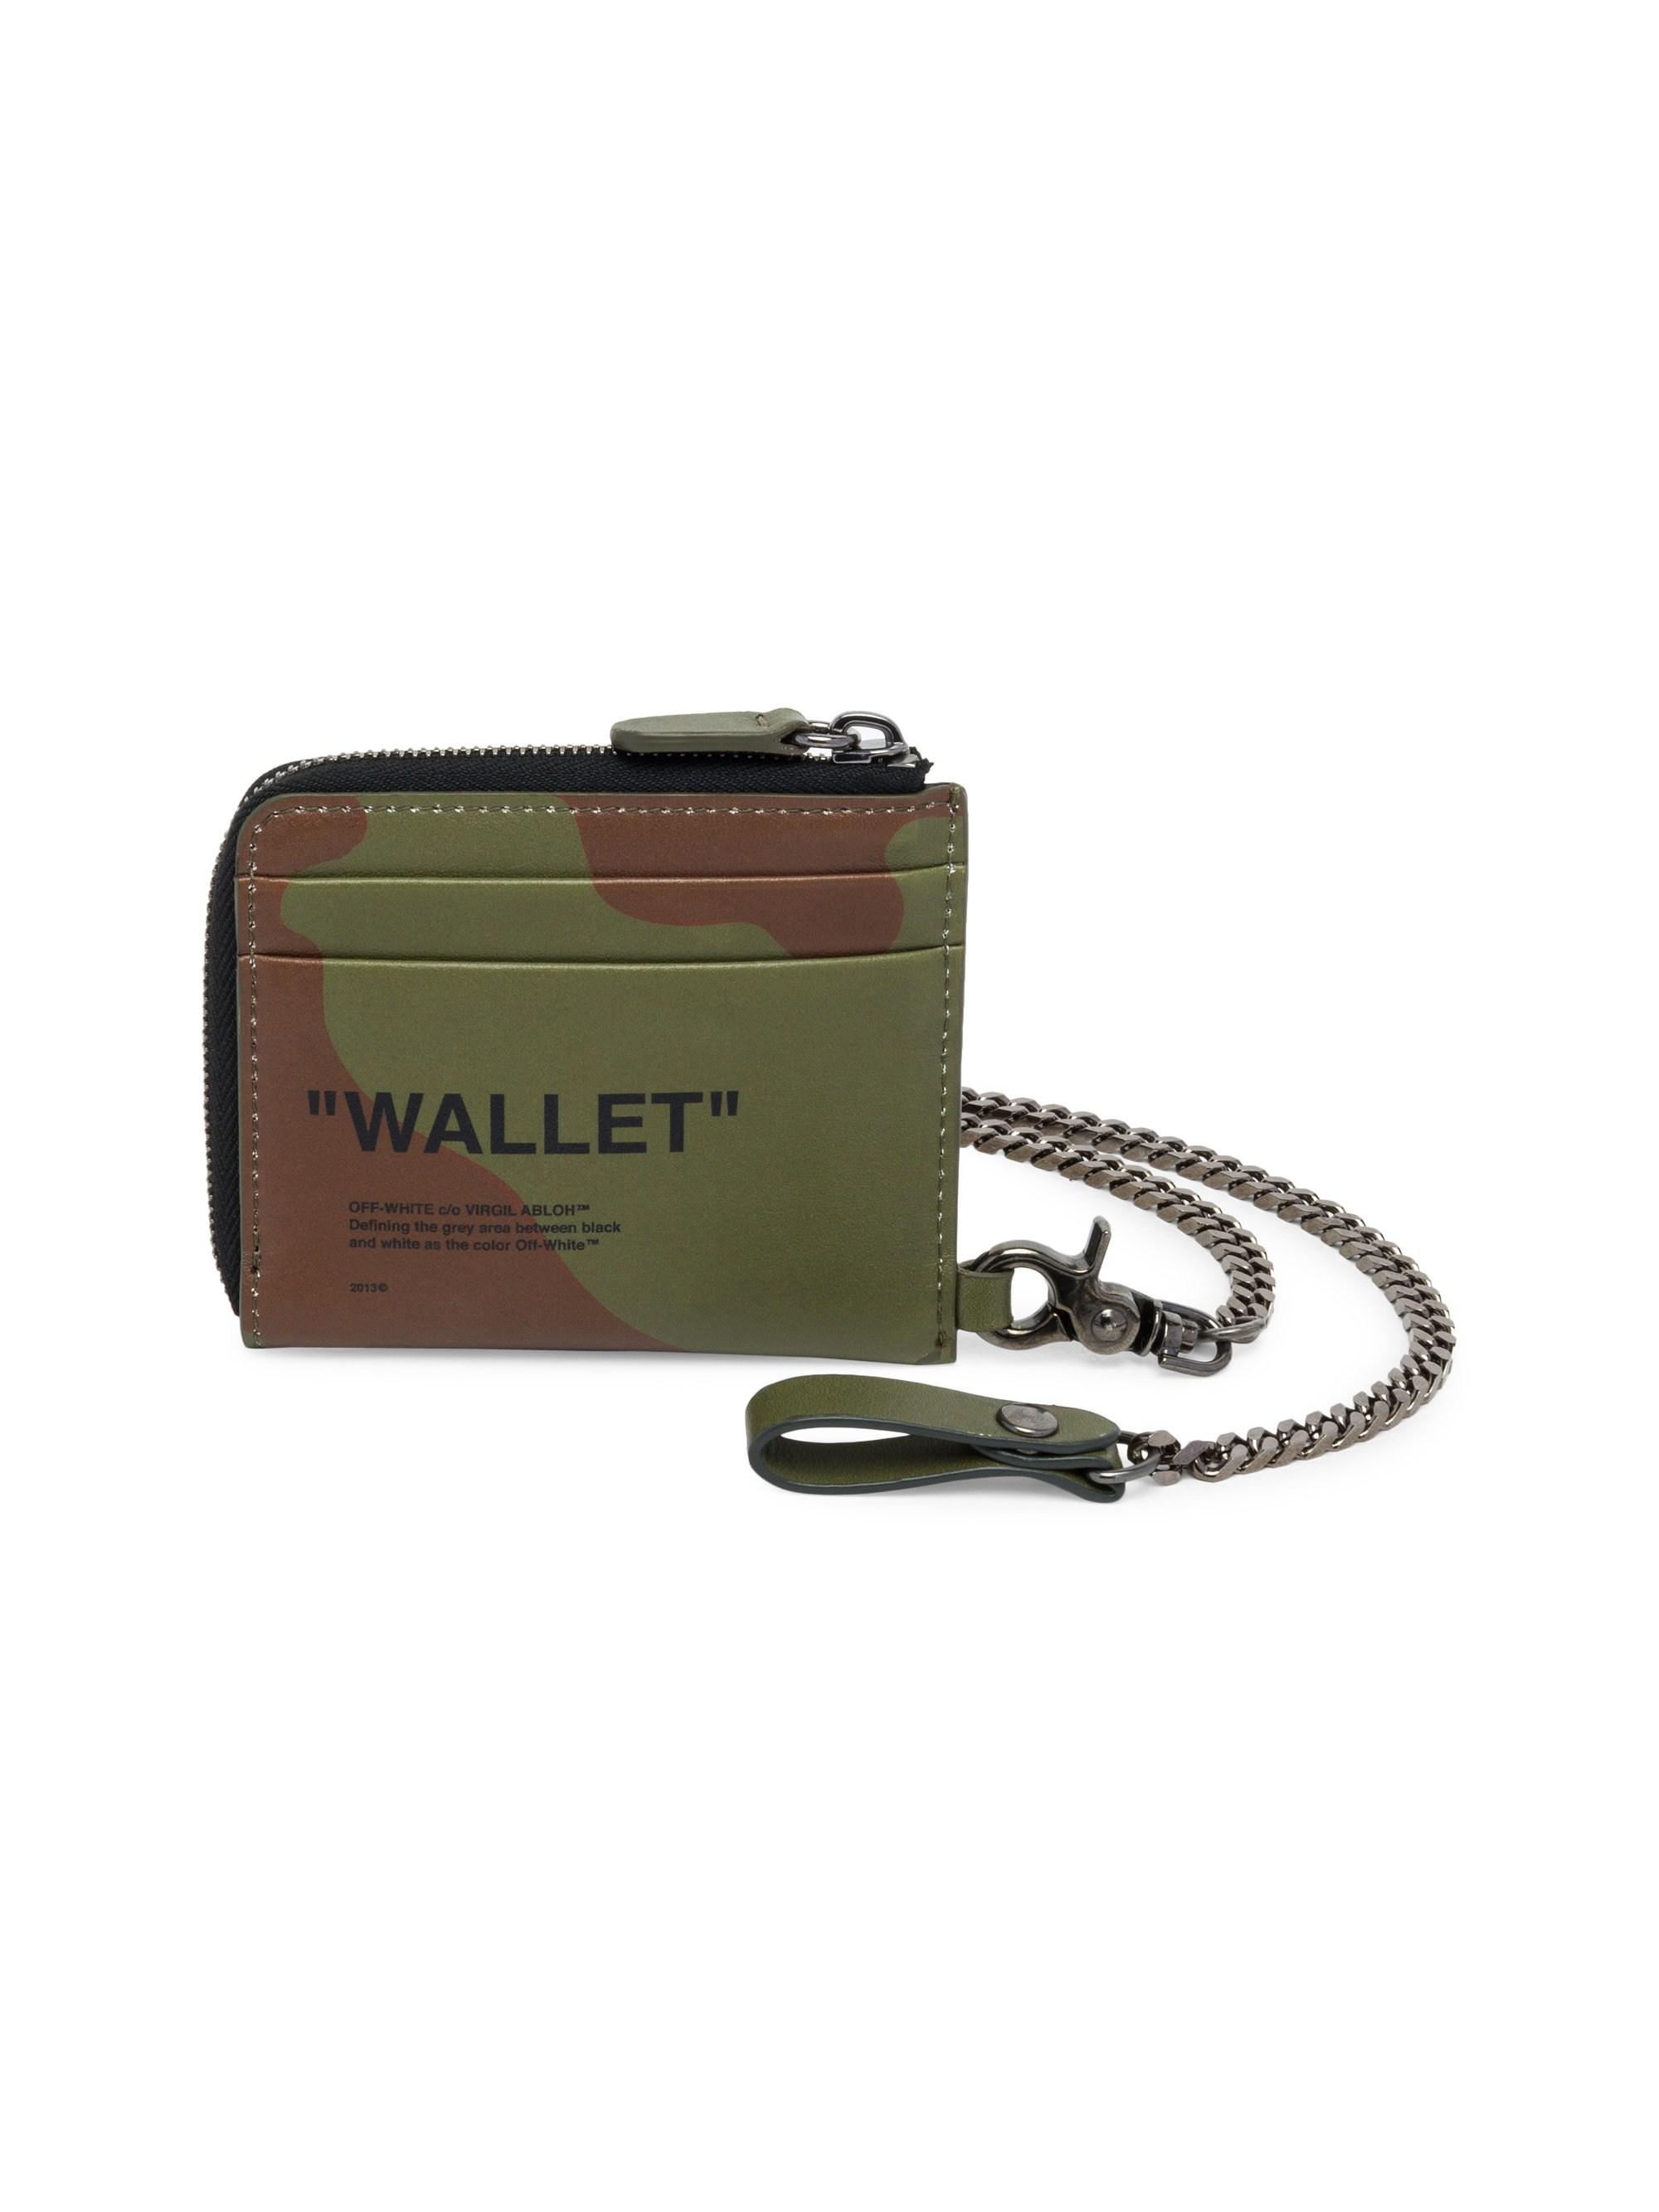 Off-White c/o Virgil Abloh Quote Leather Chain Wallet in Black for Men - Lyst